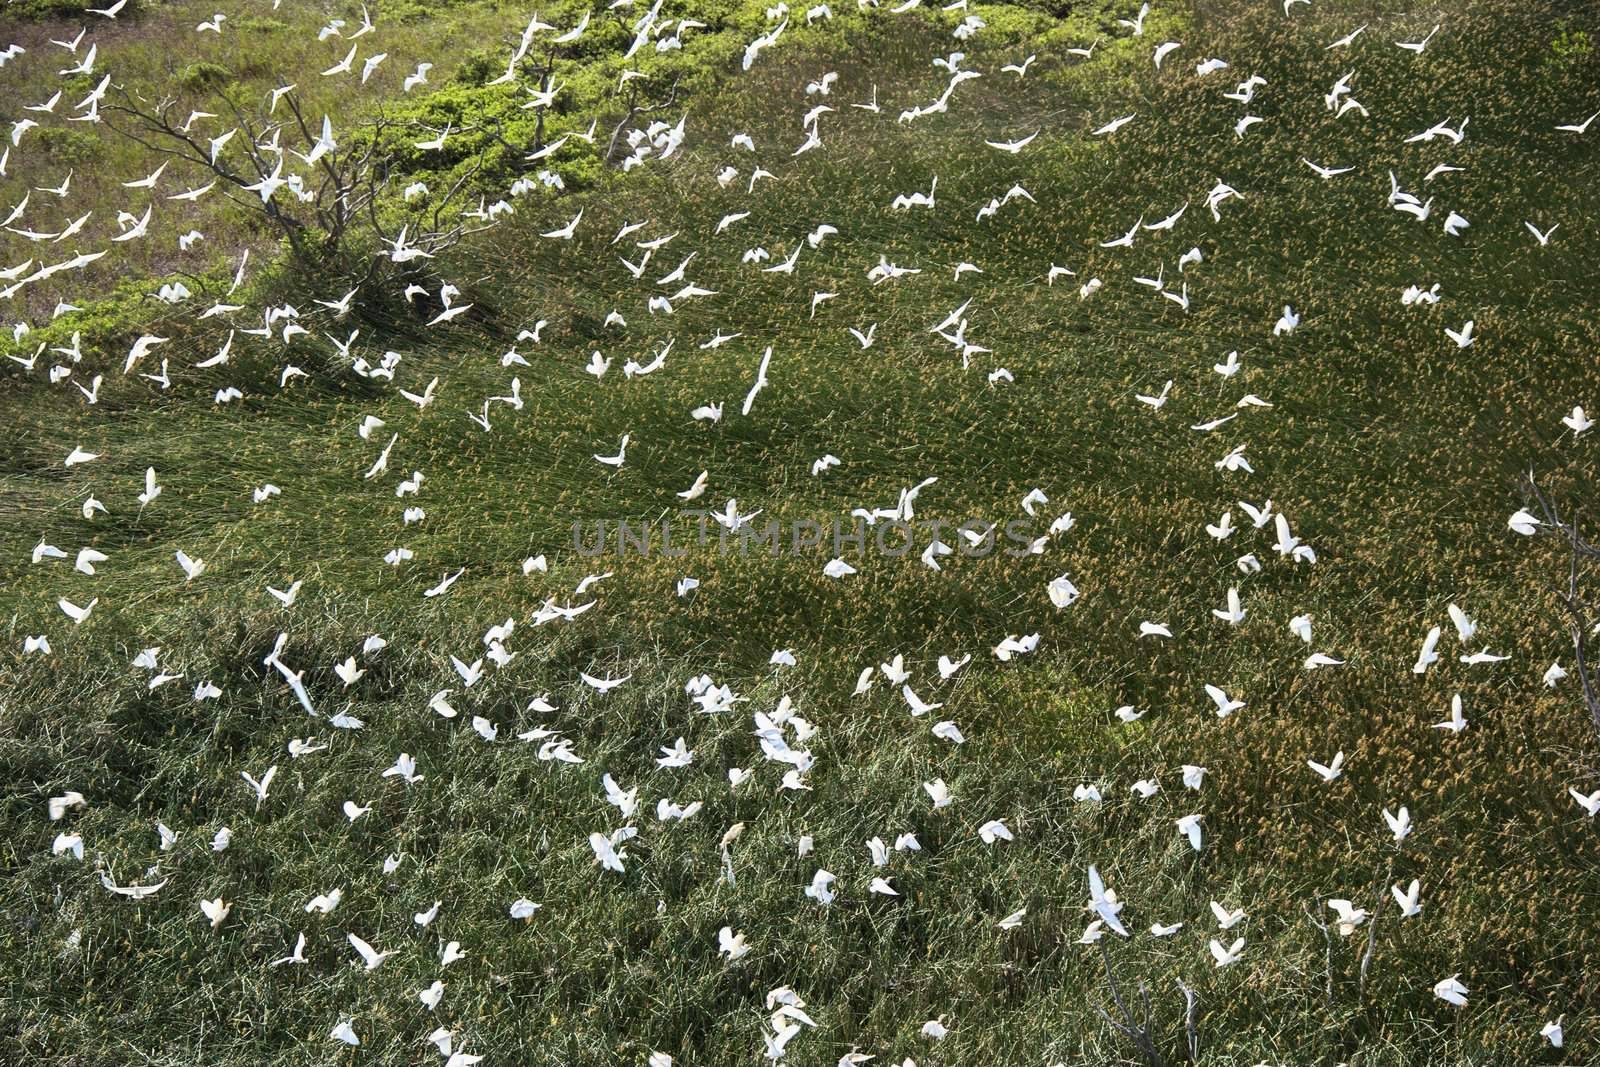 Aerial of white egrets in flight over green grassy field in Maui, Hawaii.